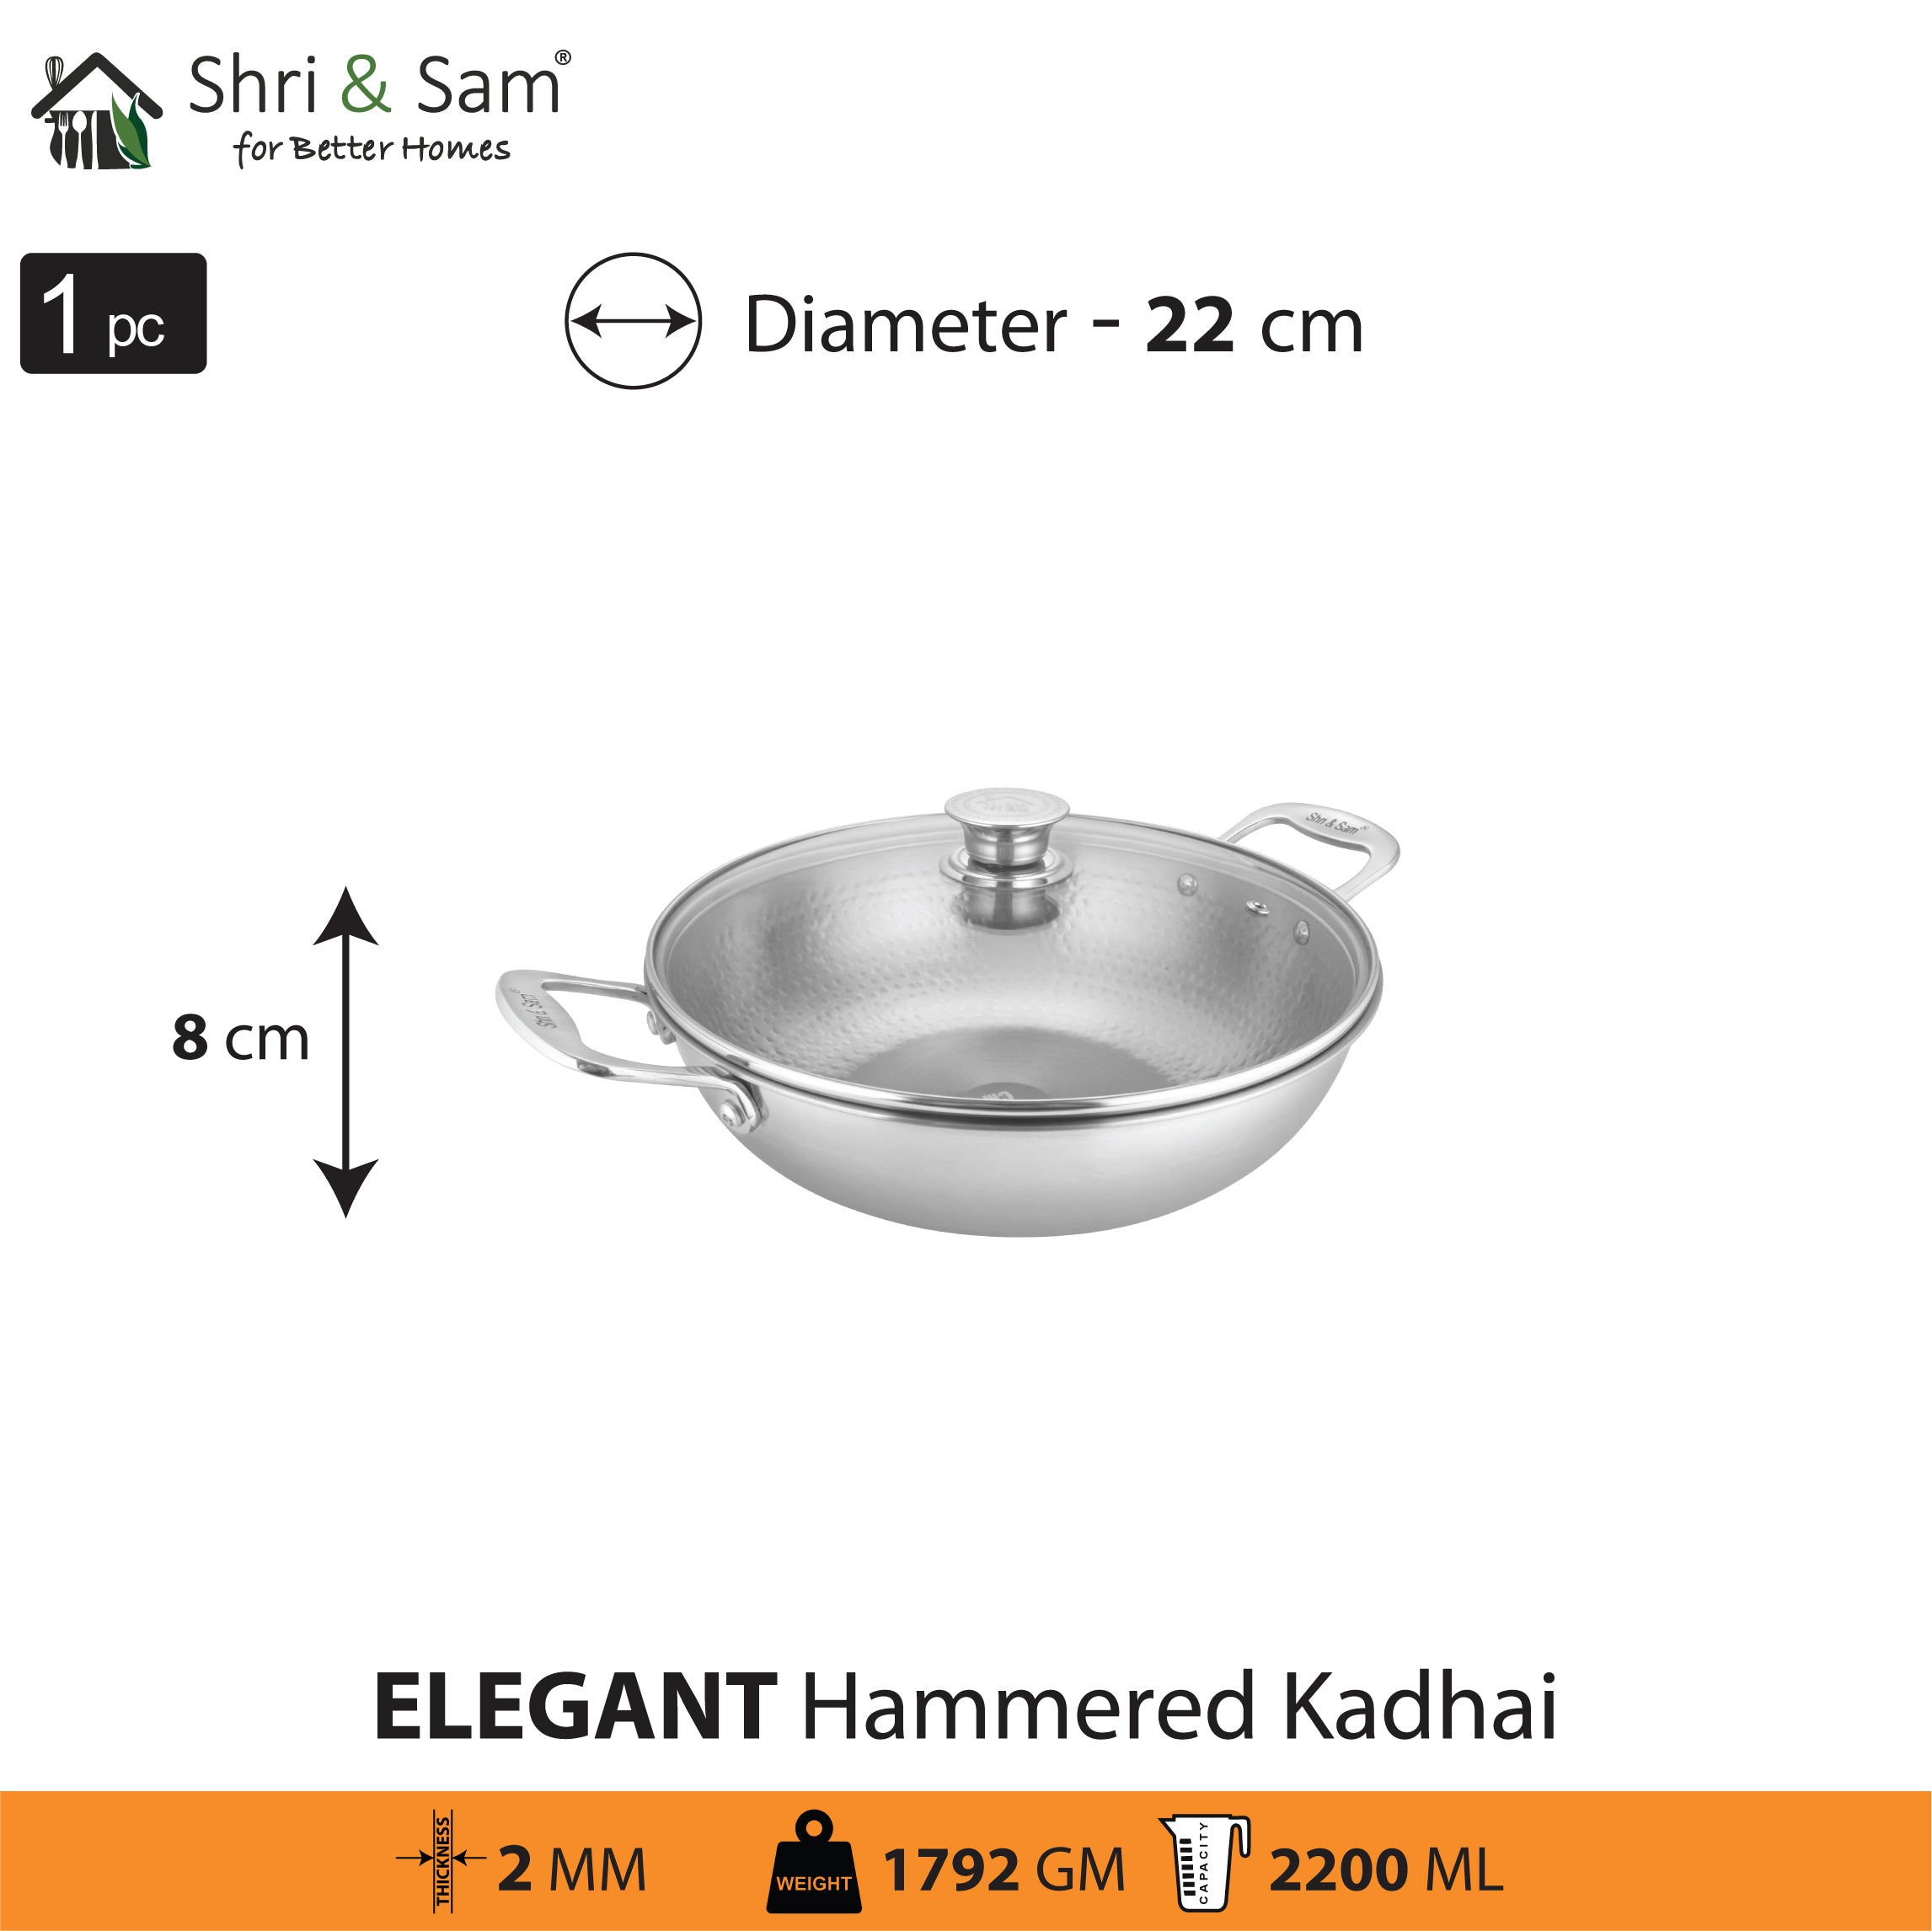 Stainless Steel Heavy Weight Hammered Kadhai with Glass Lid Elegant